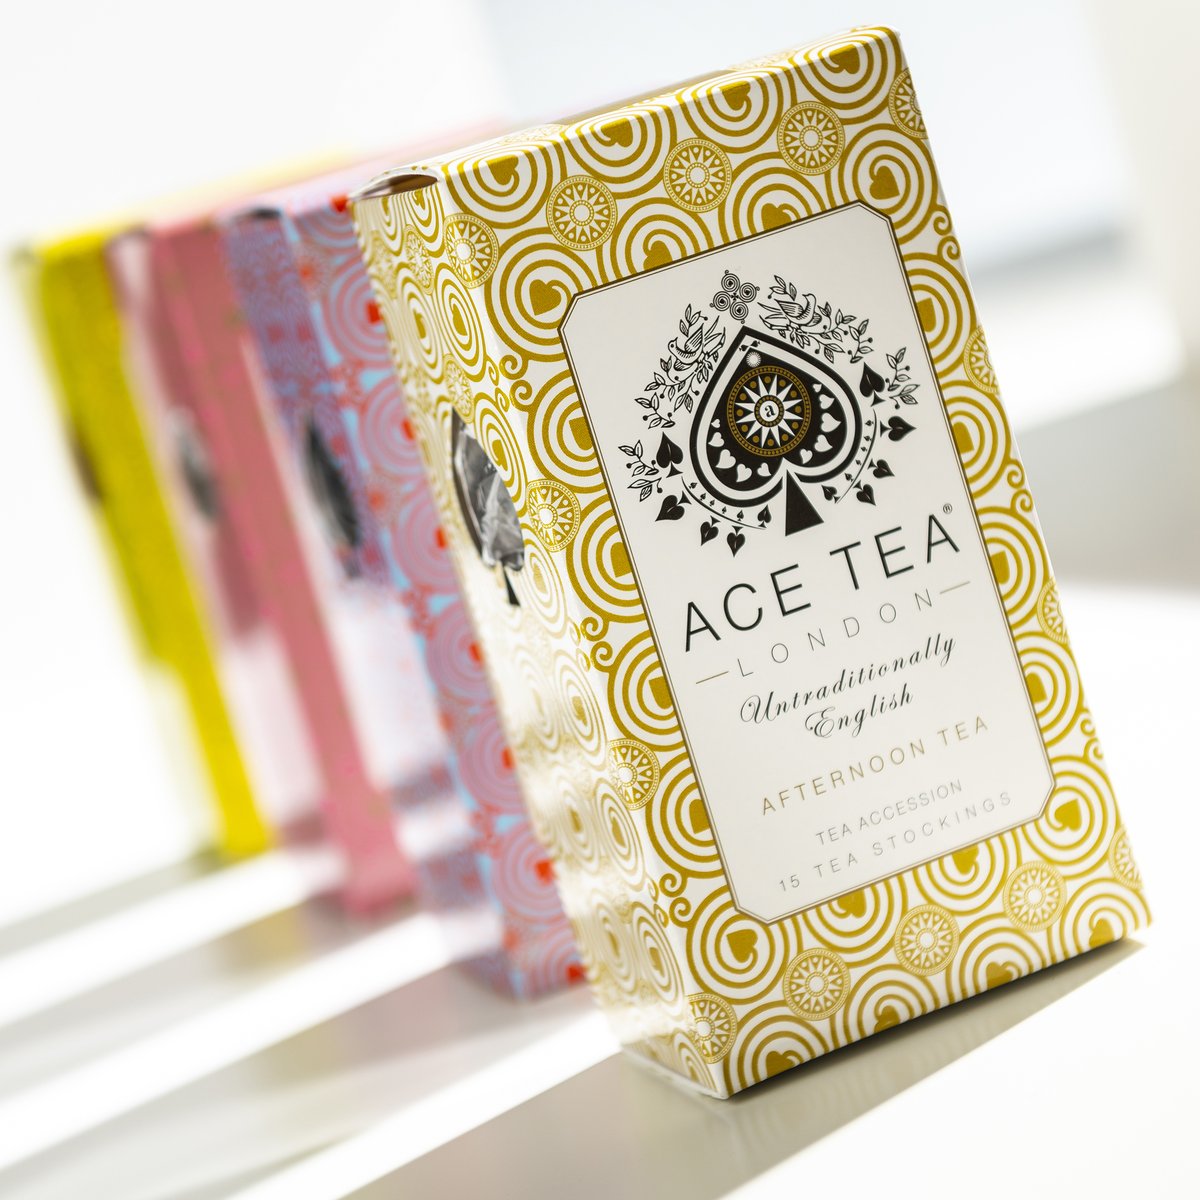 To celebrate the #afternoonteaweek 9th-15th August Ace Tea are giving YOU the chance to #win a carton of our delicious 'Afternoon Tea'. Follow us, tag a friend, RT & tell us why you love an Afternoon Tea so much! #Competition #prize #TeaHour Ends: 8/08/21